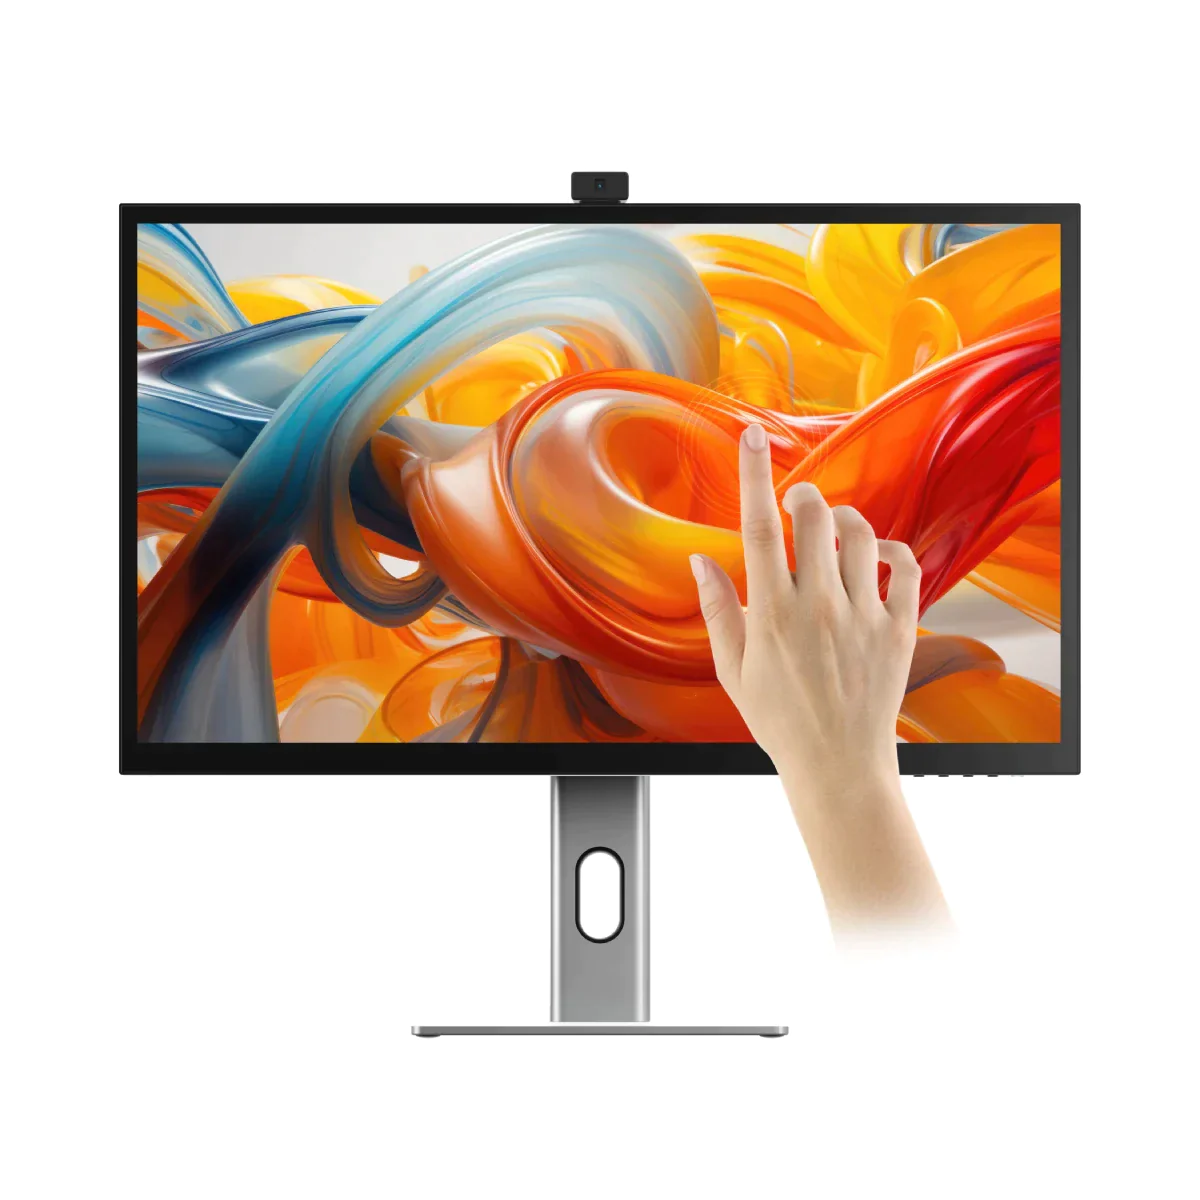 CLARITY 27" UHD 4K Monitor + Clarity Pro Touch 27" UHD 4K Monitor with 65W PD, Webcam and Touchscreen + DX2 Dual 4K Display Universal Docking Station with 65W Power Delivery